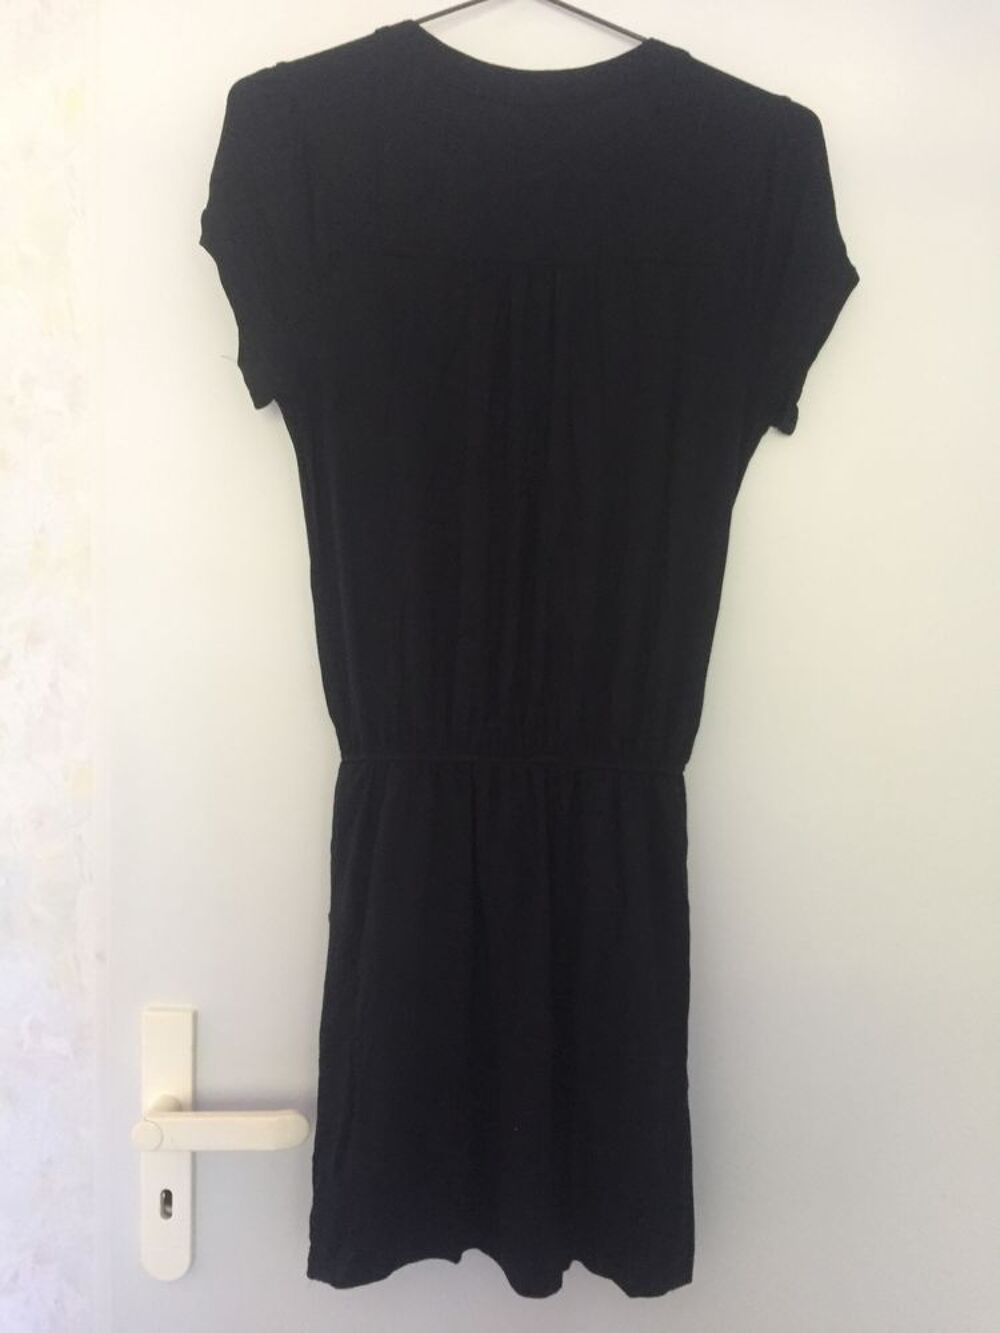 Robe noire &agrave; poches - Taille 34-36 Vtements